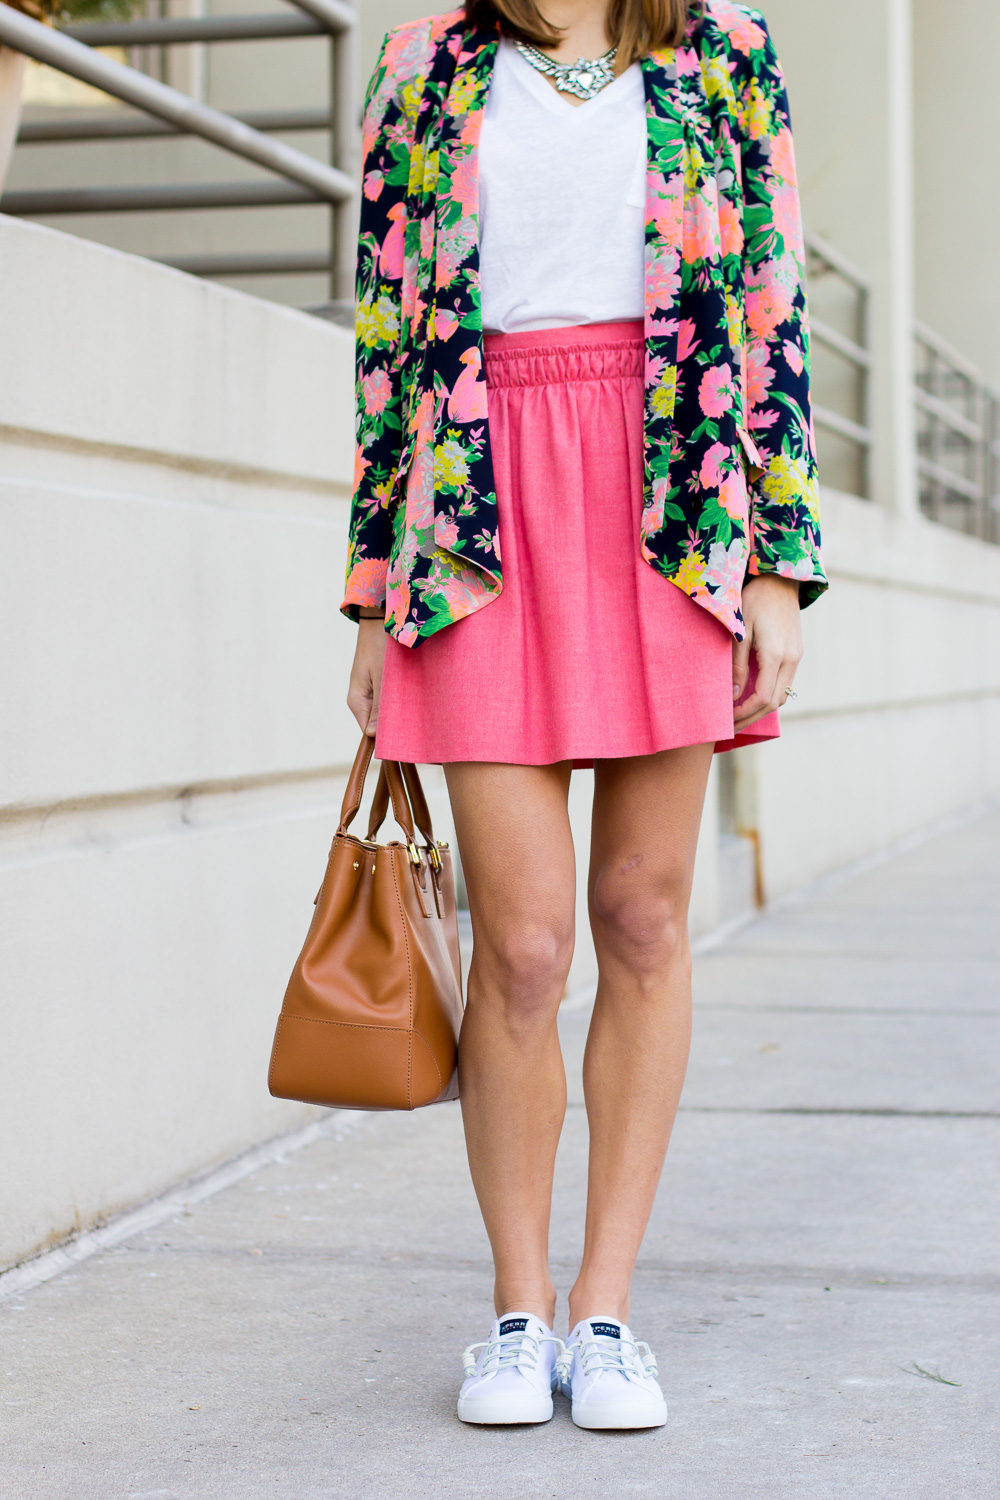 sperry seacoast sneakers, floral blazer, white sneakers, spring outfit, preppy outfit, the fox and she, blair culwell staky